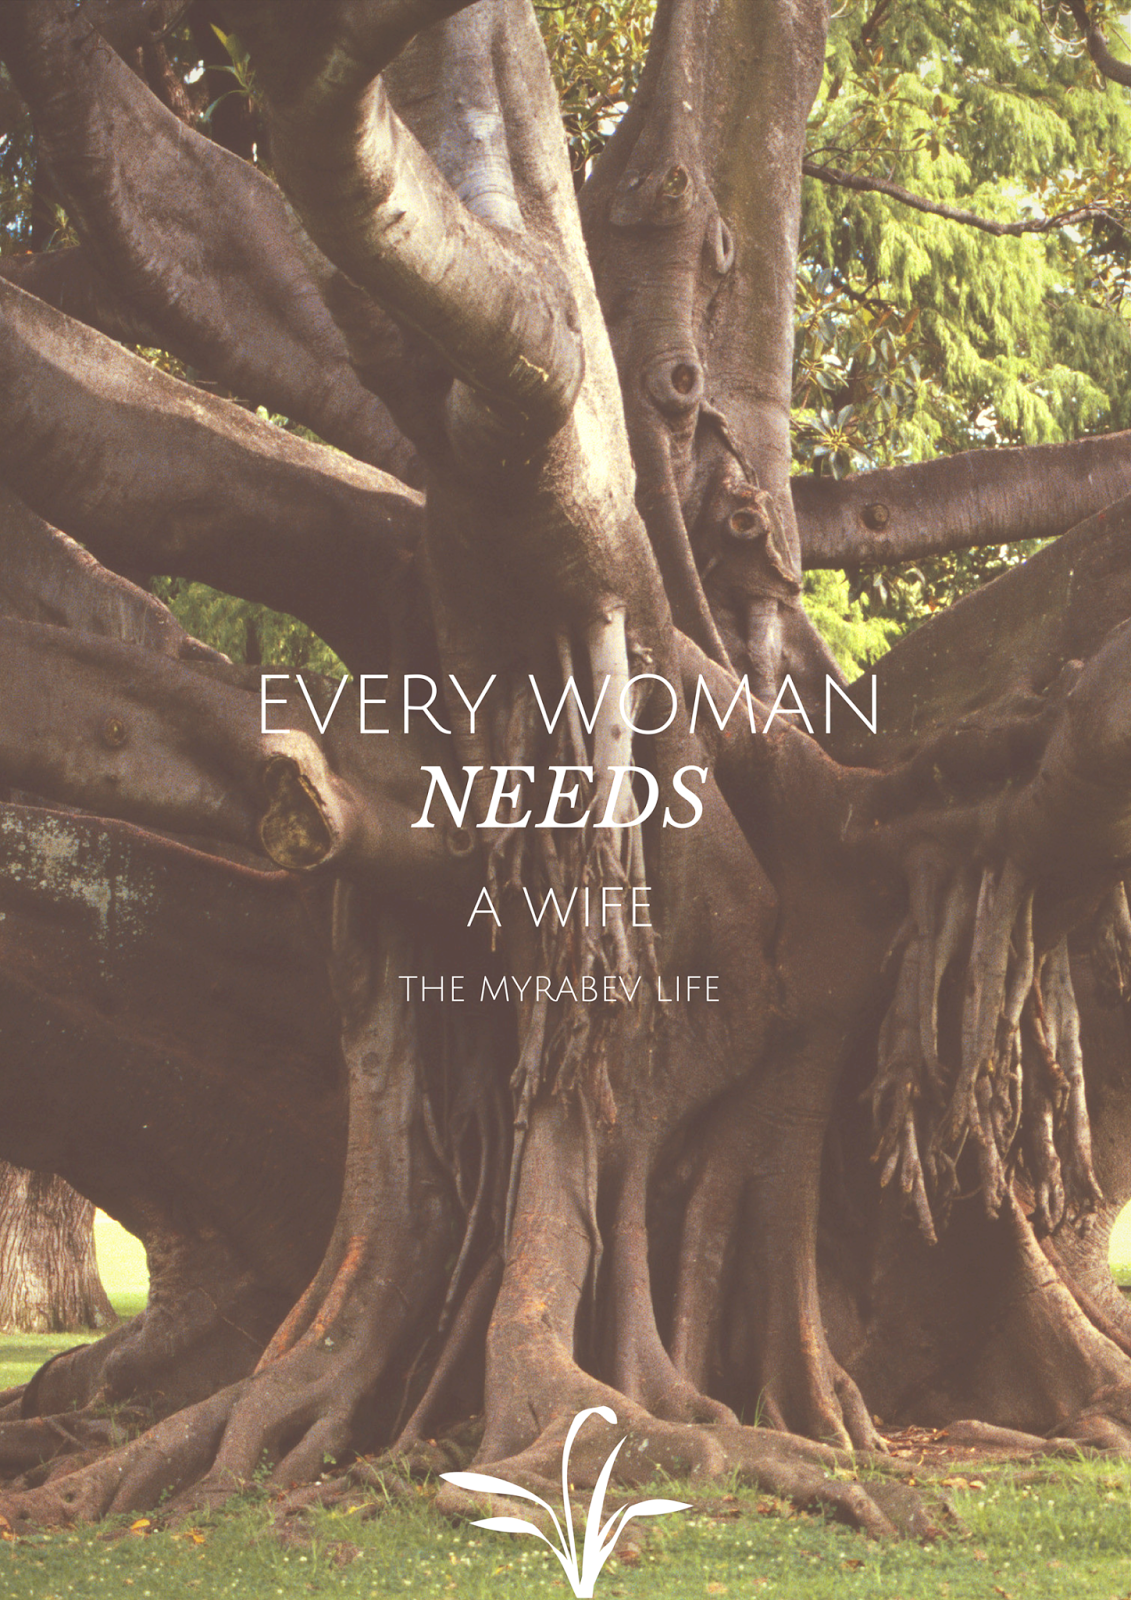 ::The Myrabev Life::: {Book Review} Every Woman needs a wife